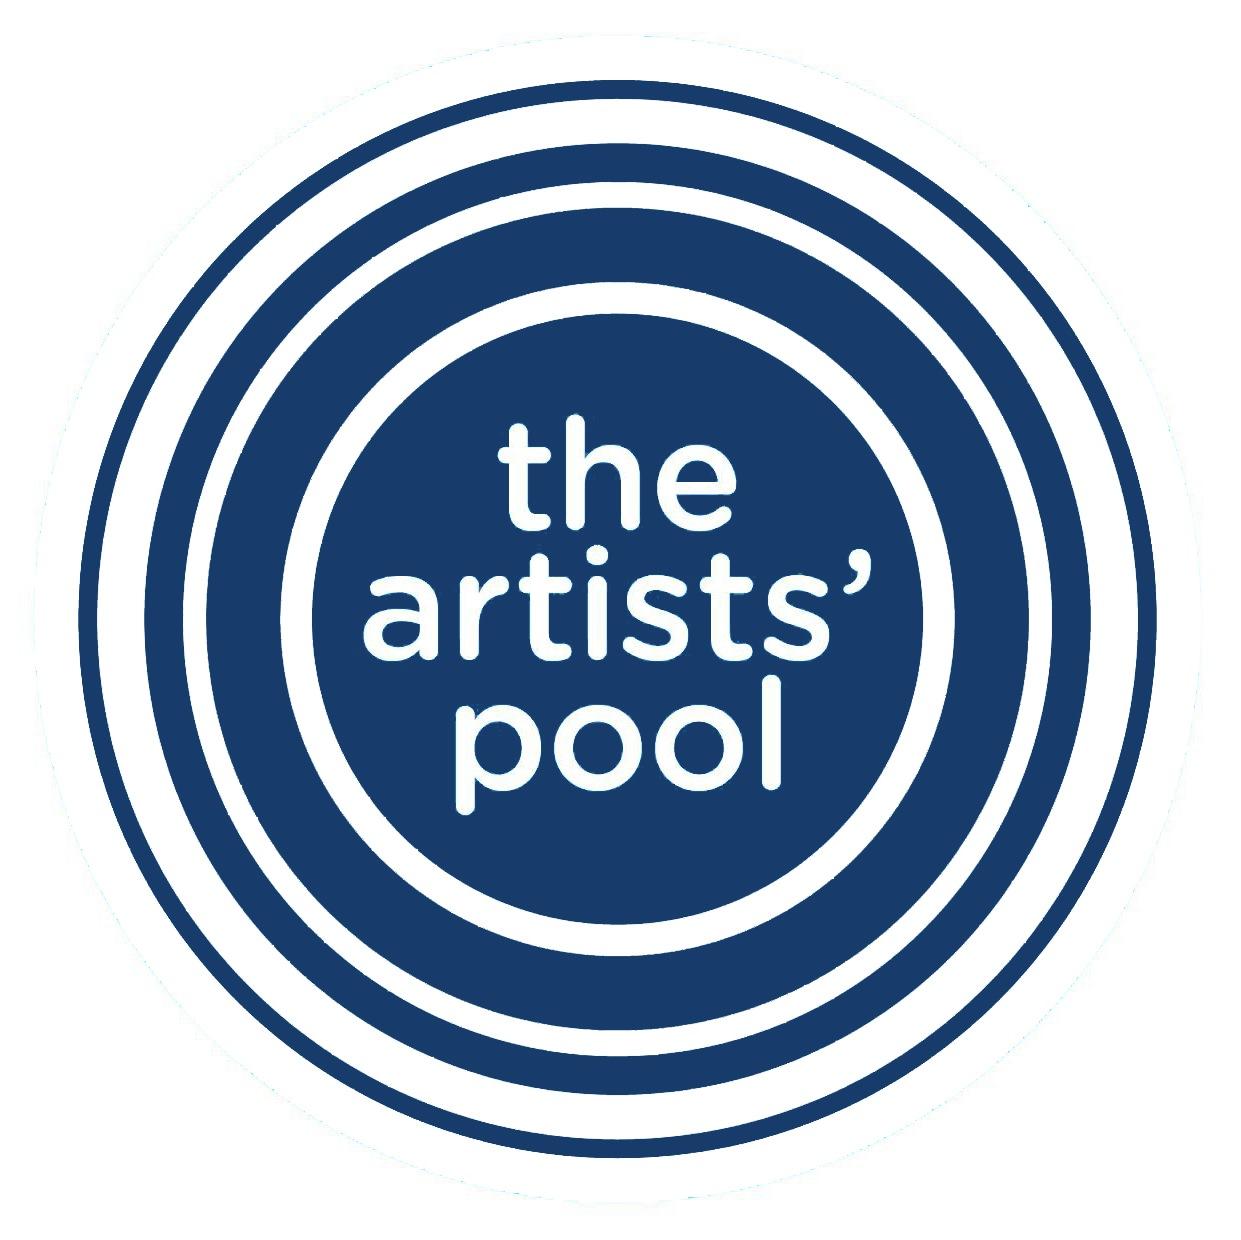 the artists' pool